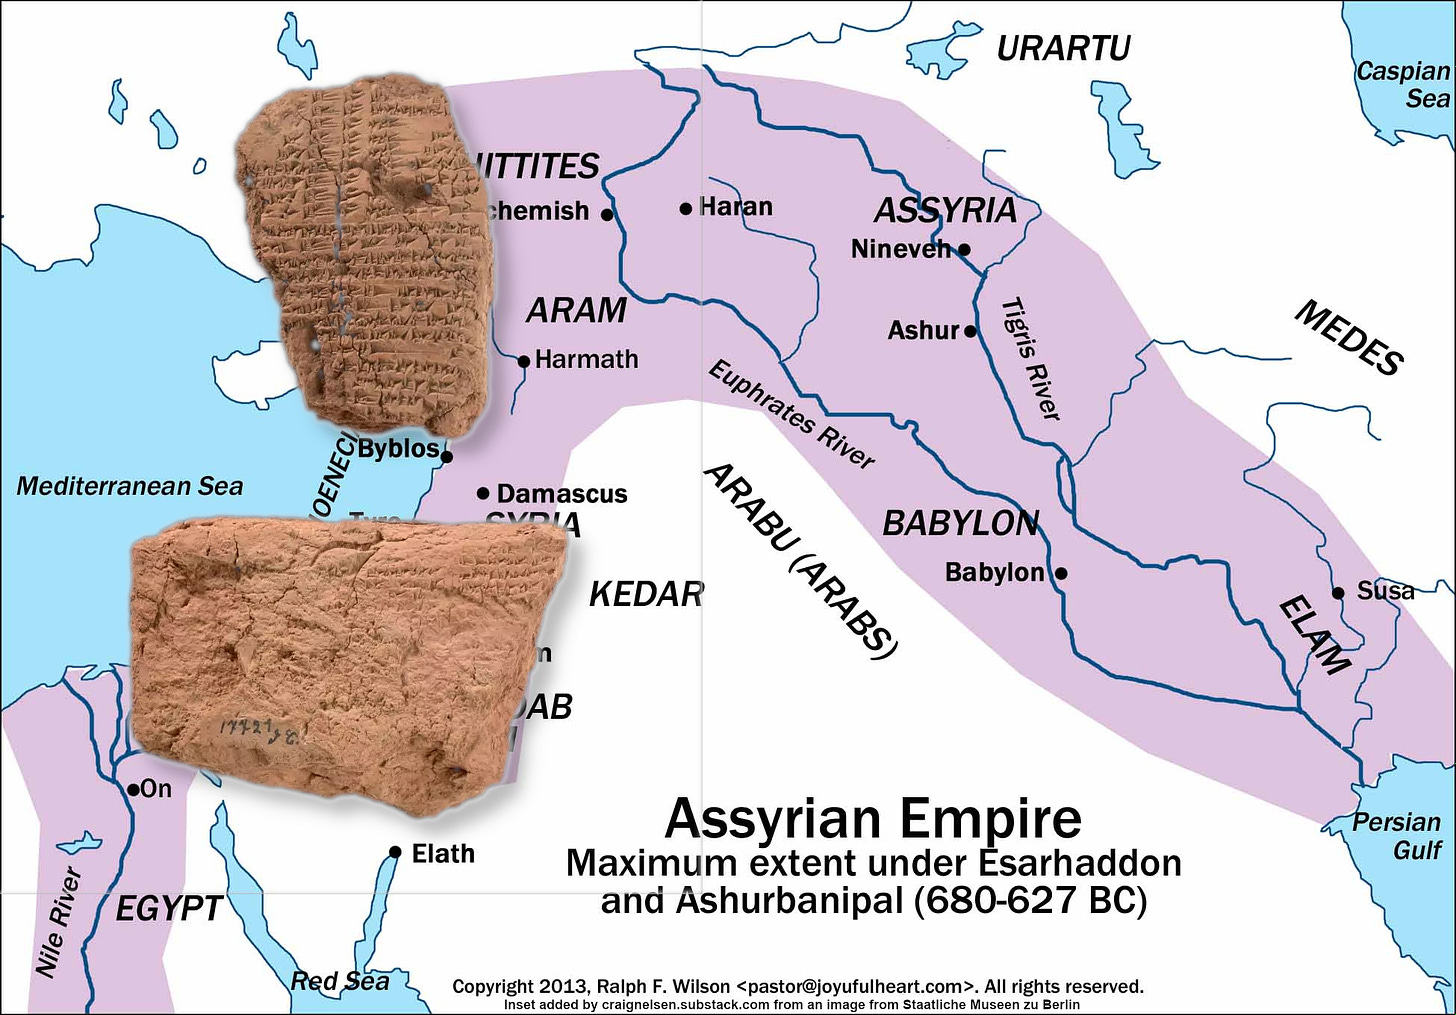 Image of tablets inset on map of Assyrian Empire from 680-627 BC